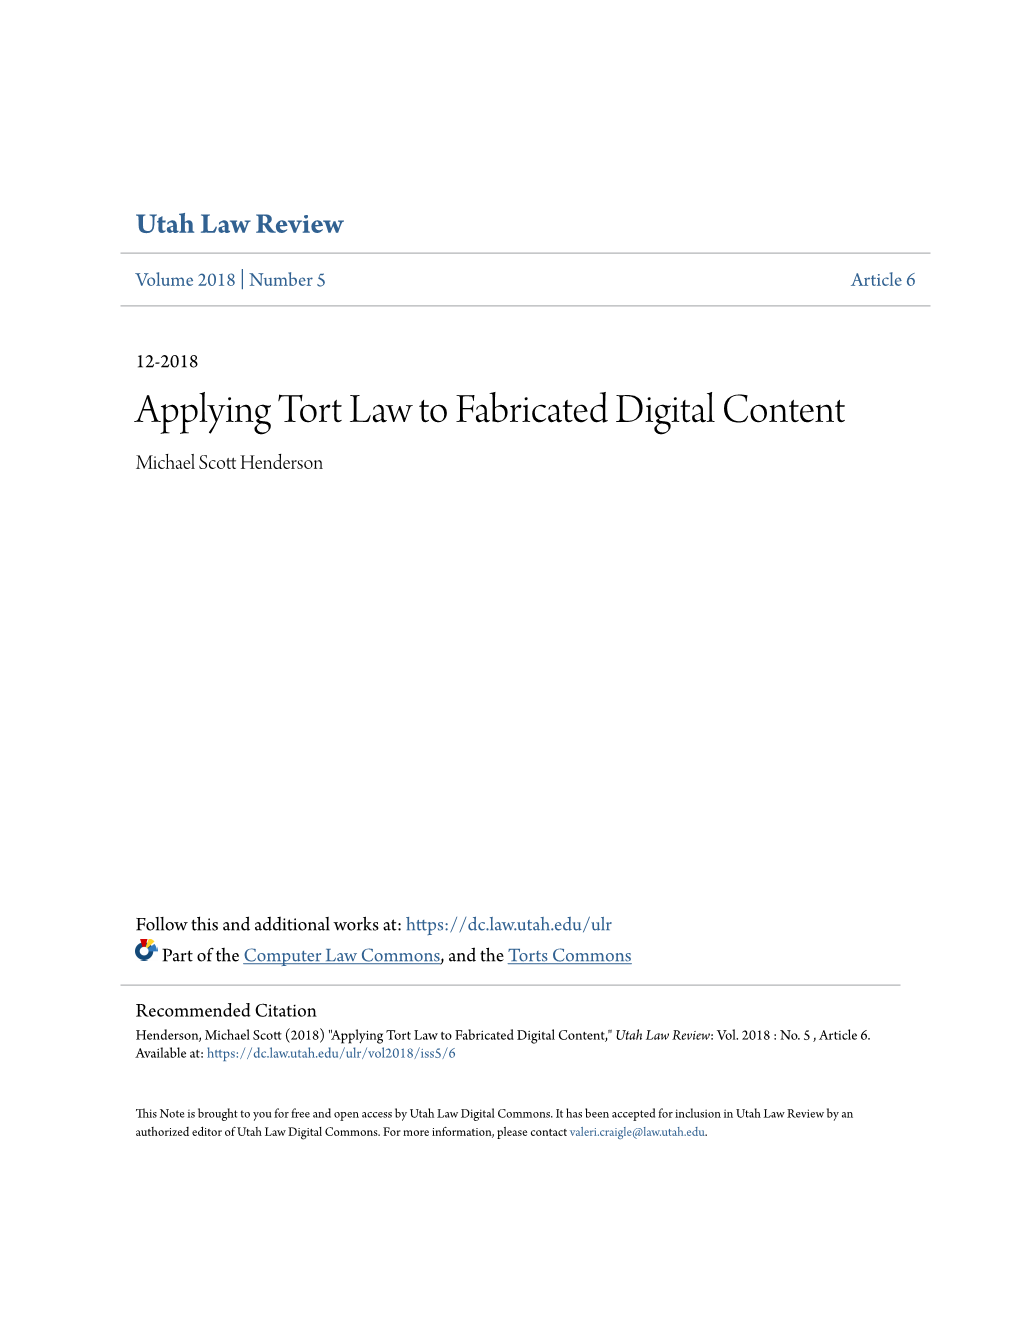 Applying Tort Law to Fabricated Digital Content Michael Scott Eh Nderson